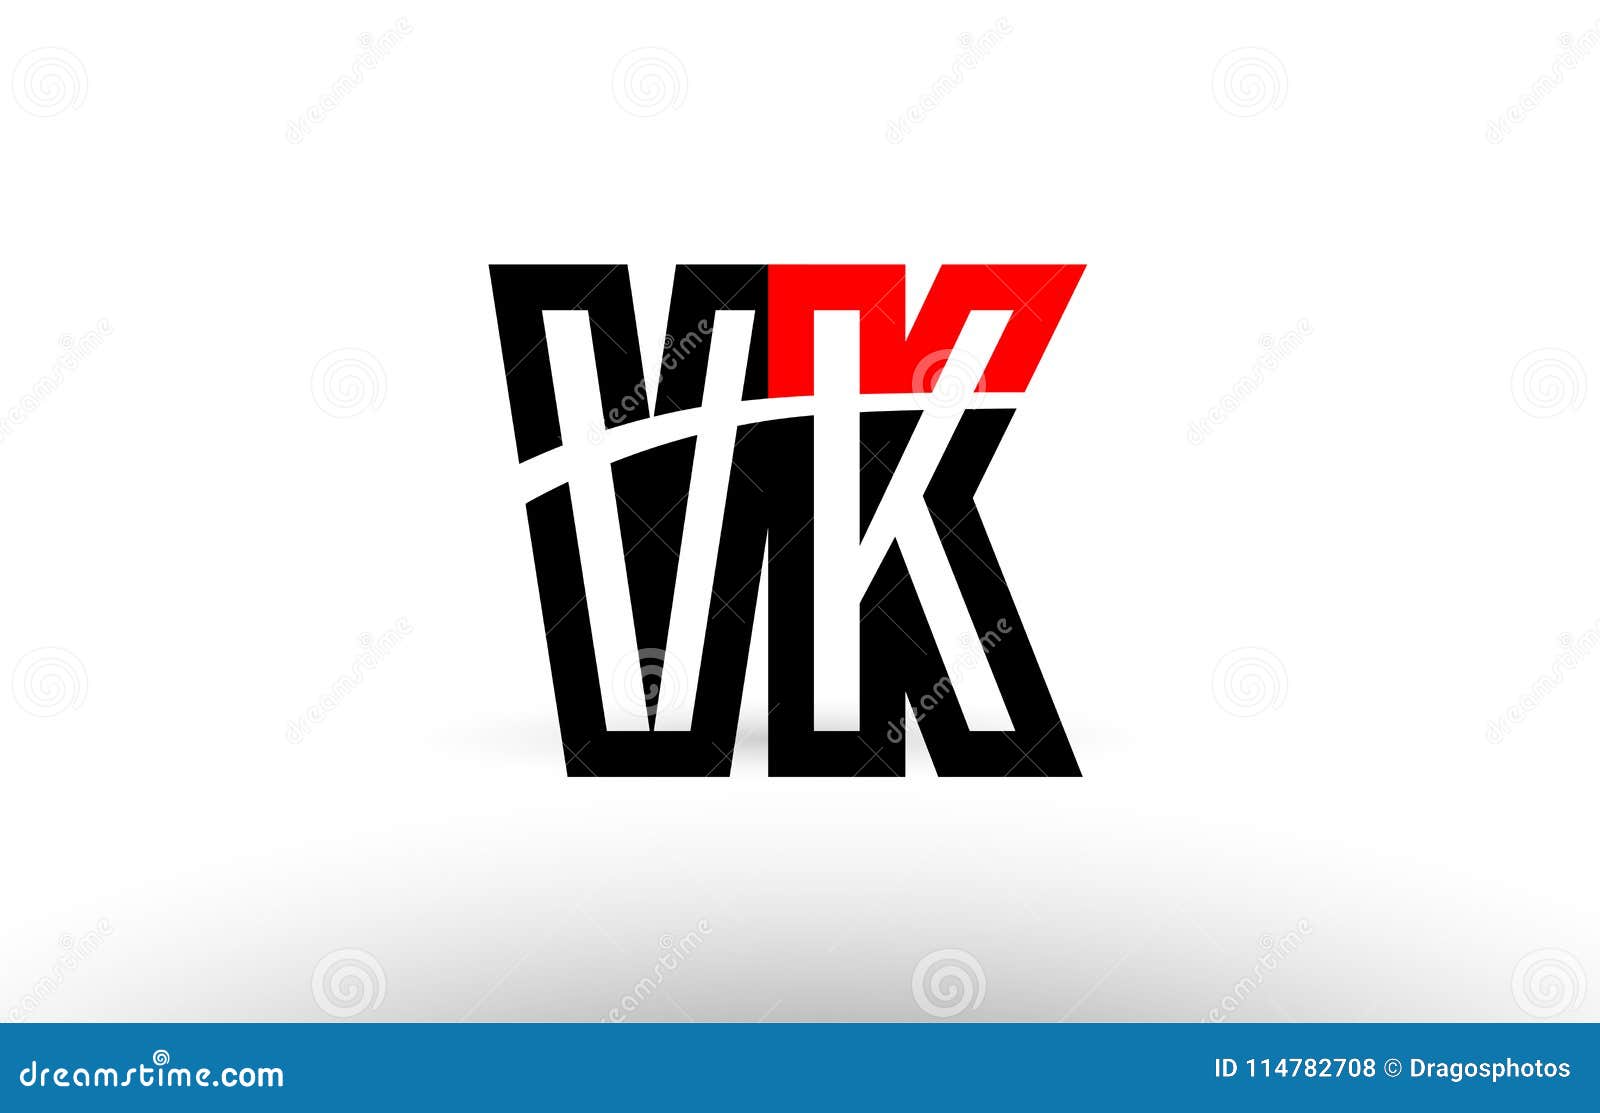 Vk monogram Clipart Vector and Illustration 376 Vk monogram clip art  vector EPS images available to search from thousands of royalty free stock  art and stock illustration creators